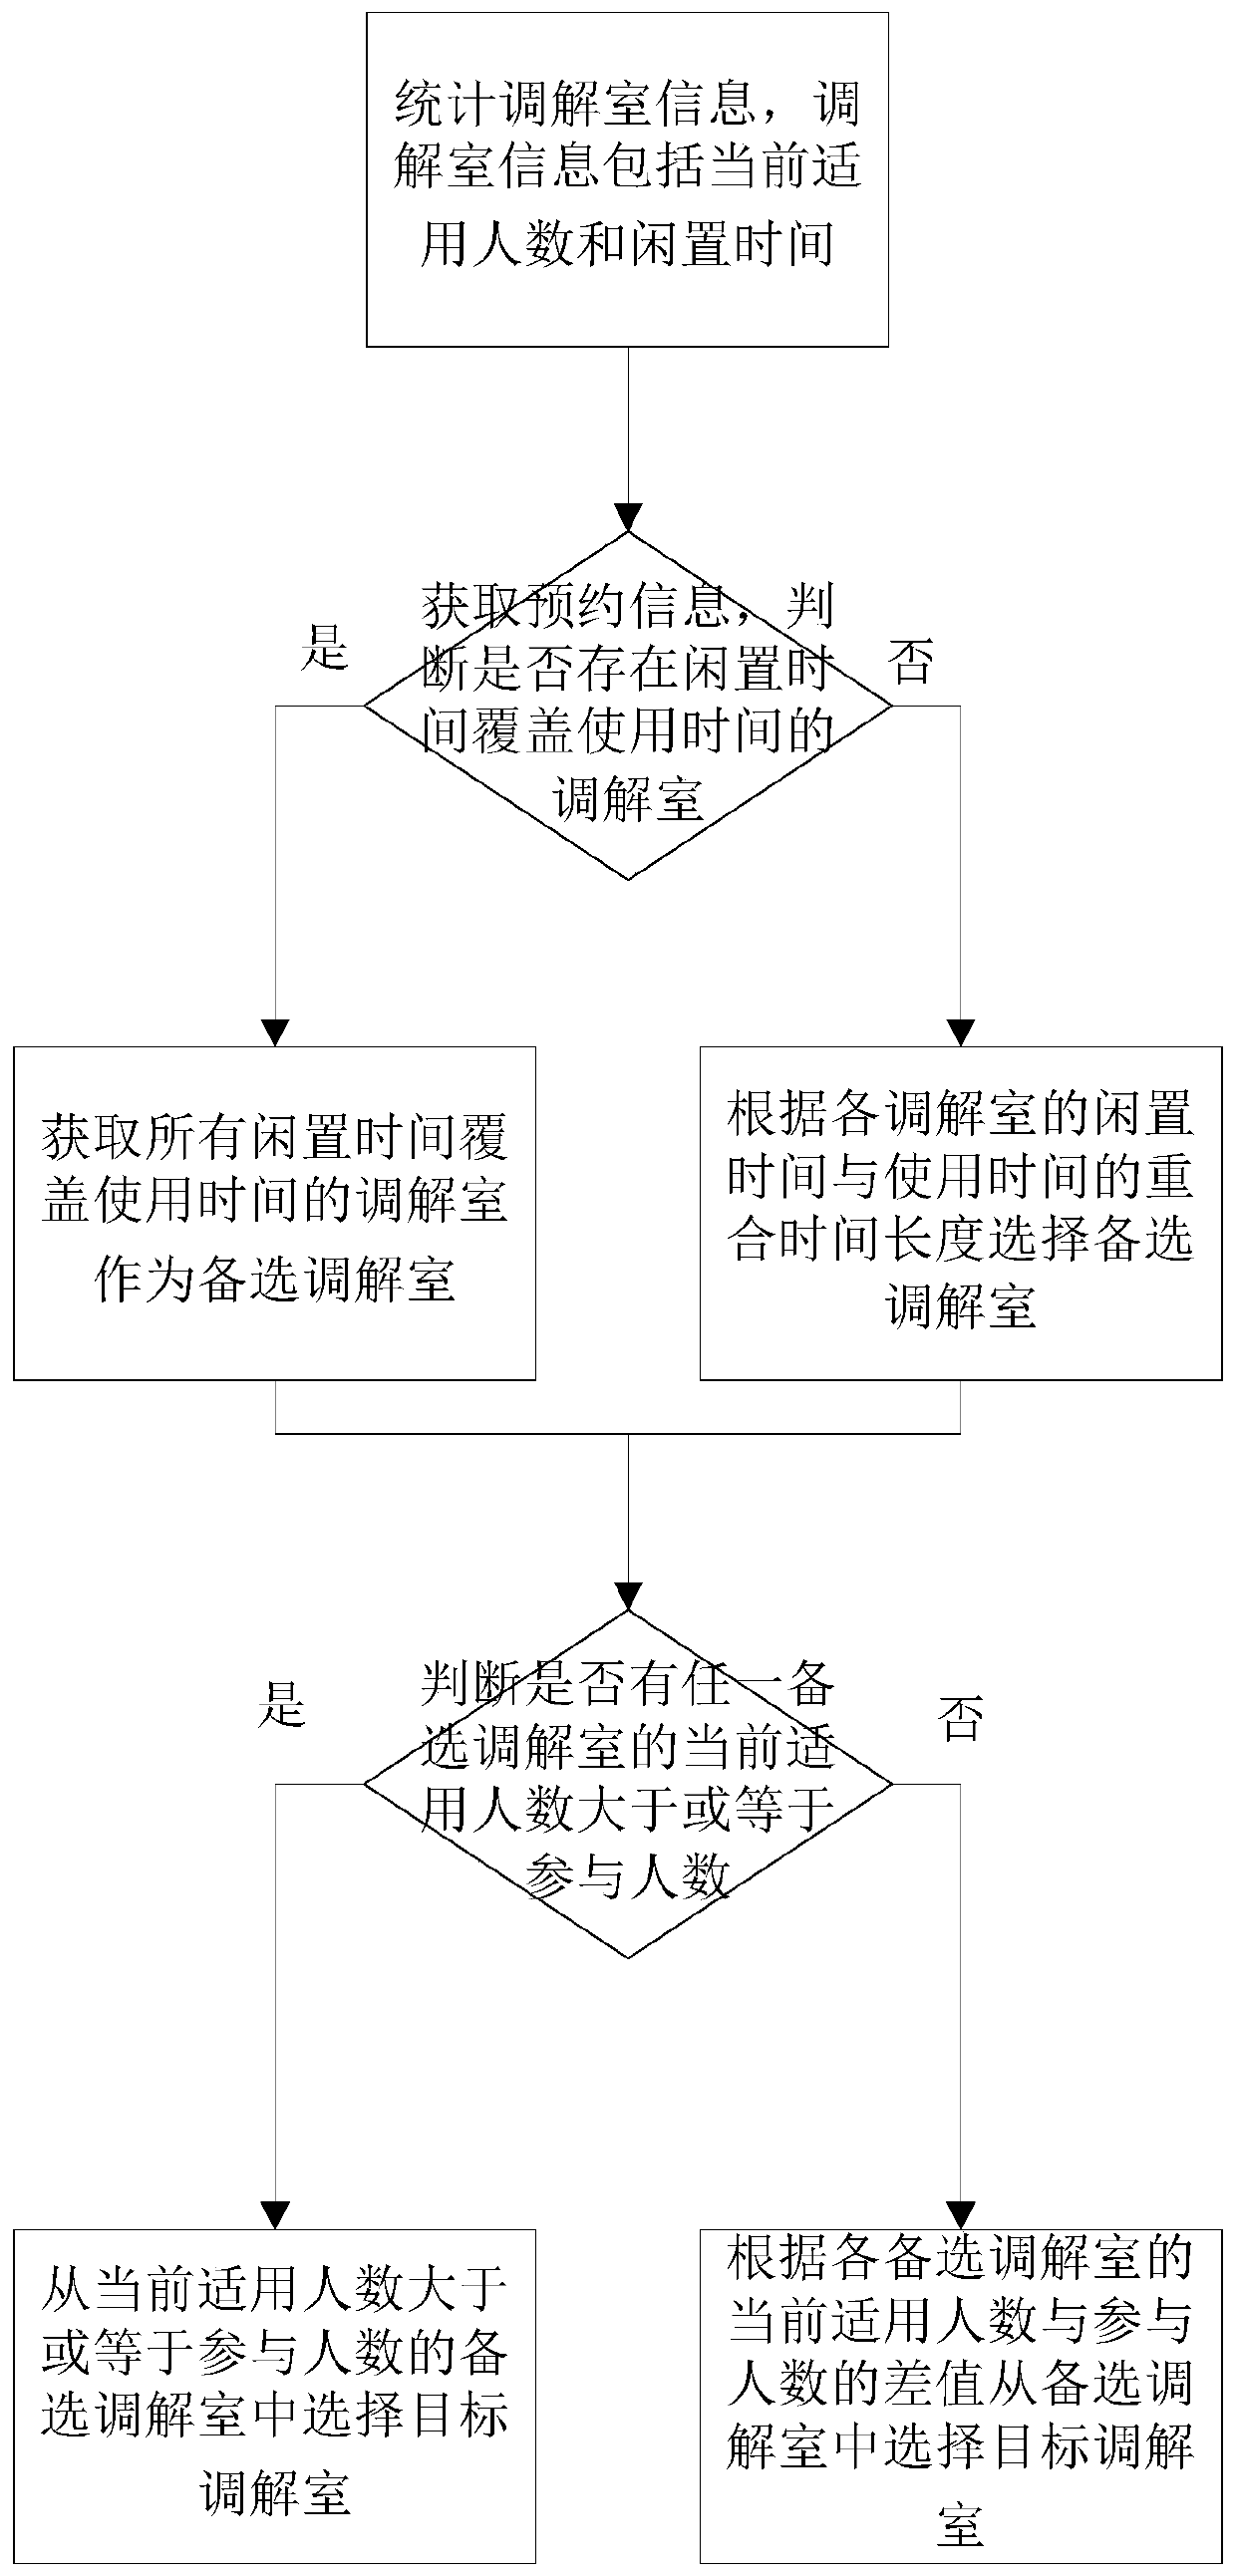 Functional classroom reservation method and system